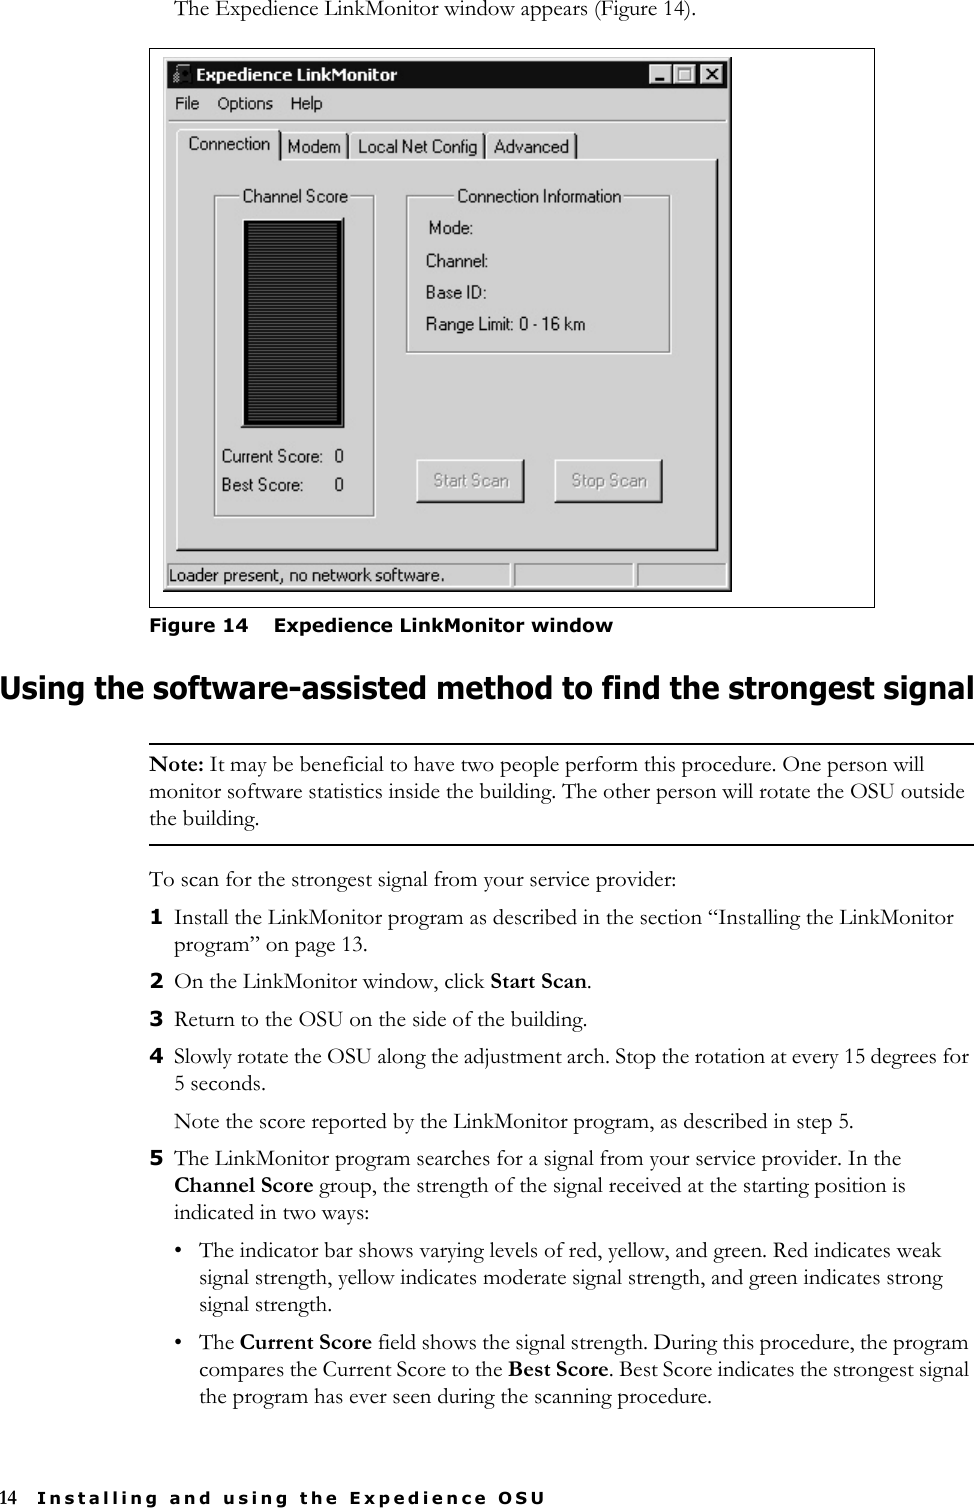 14 Installing and using the Expedience OSUThe Expedience LinkMonitor window appears (Figure 14).Using the software-assisted method to find the strongest signalNote: It may be beneficial to have two people perform this procedure. One person will monitor software statistics inside the building. The other person will rotate the OSU outside the building.To scan for the strongest signal from your service provider:1Install the LinkMonitor program as described in the section “Installing the LinkMonitor program” on page 13. 2On the LinkMonitor window, click Start Scan. 3Return to the OSU on the side of the building. 4Slowly rotate the OSU along the adjustment arch. Stop the rotation at every 15 degrees for 5 seconds. Note the score reported by the LinkMonitor program, as described in step 5. 5The LinkMonitor program searches for a signal from your service provider. In the Channel Score group, the strength of the signal received at the starting position is indicated in two ways:• The indicator bar shows varying levels of red, yellow, and green. Red indicates weak signal strength, yellow indicates moderate signal strength, and green indicates strong signal strength.•The Current Score field shows the signal strength. During this procedure, the program compares the Current Score to the Best Score. Best Score indicates the strongest signal the program has ever seen during the scanning procedure.Figure 14 Expedience LinkMonitor window